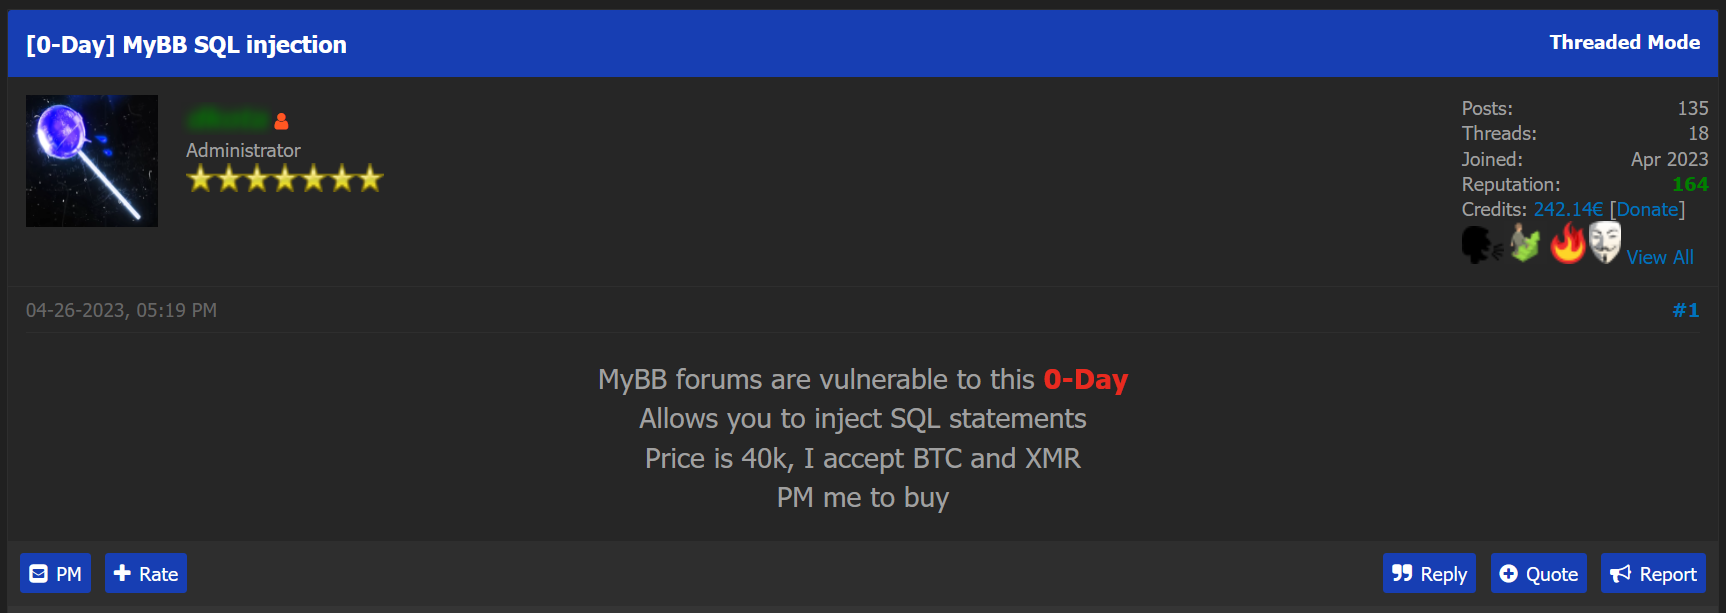 A zero-day that poses a high risk for businesses using MyBB forums is offered for sale on OnniForums